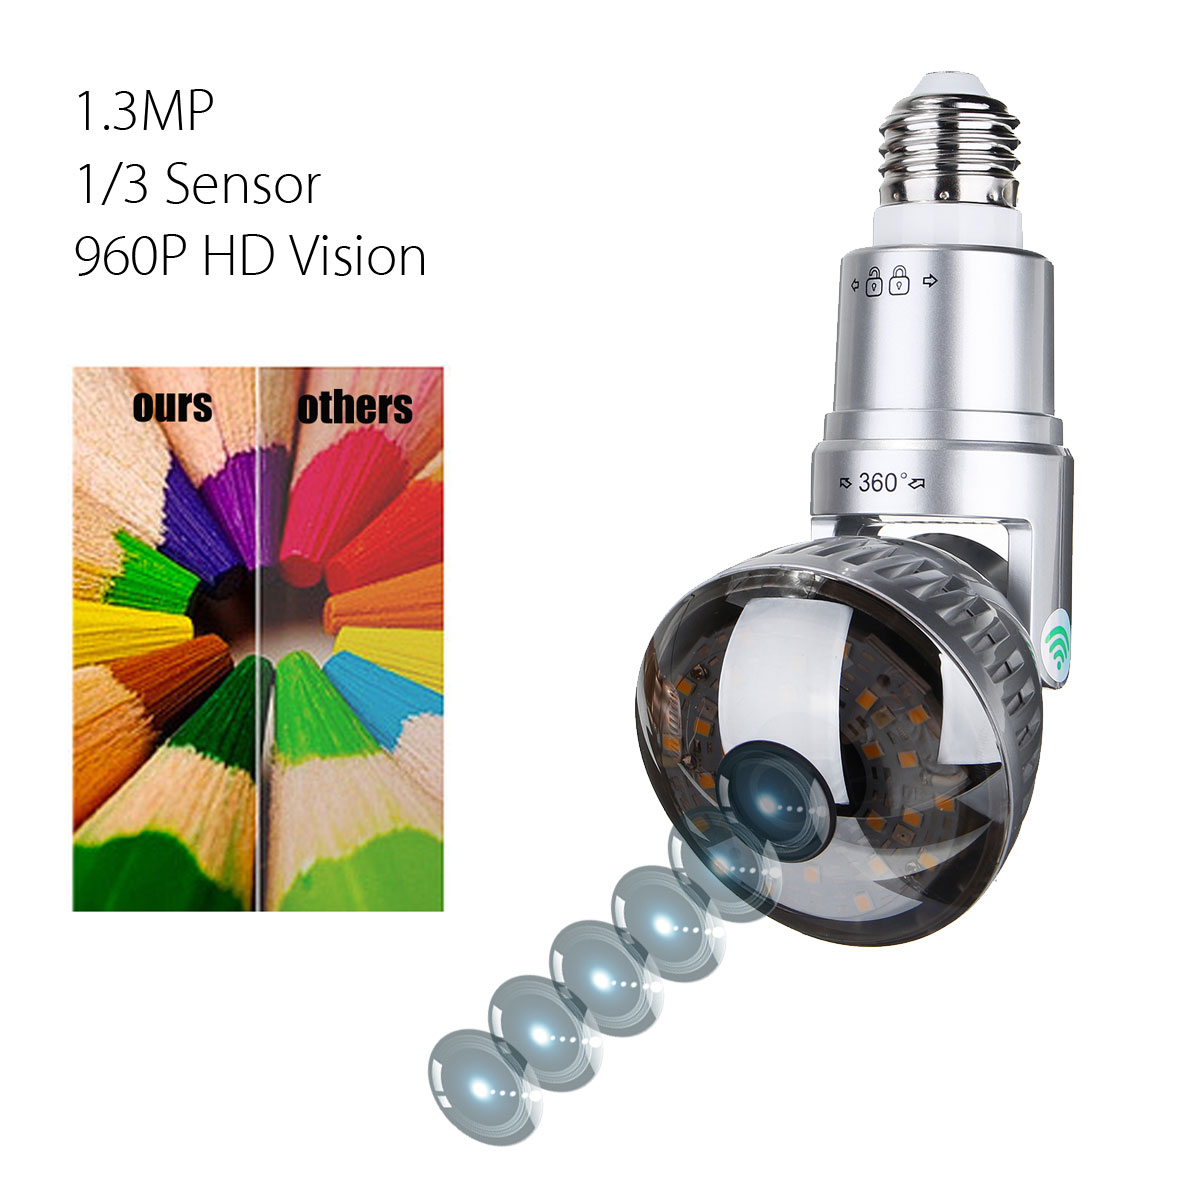 3.6mm Wireless Mirror Bulb Security Camera DVR WIFI LED Light IP Camera Motion Detection 61